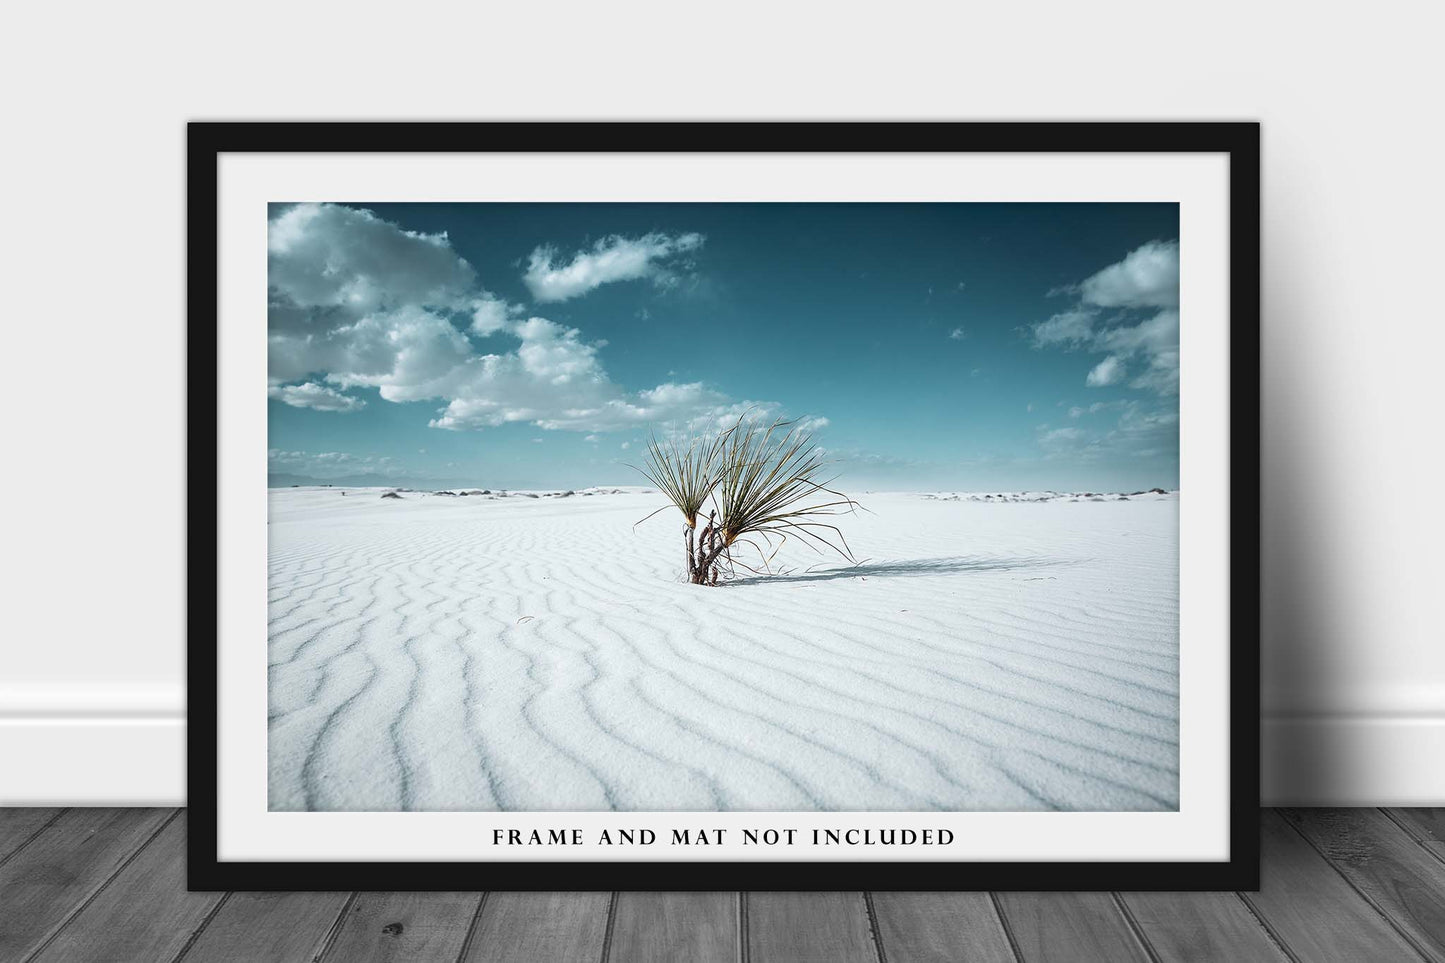 Desert Photography Print (Not Framed) Picture of Yucca Plant in Sand Dunes at White Sands National Park New Mexico Retro Cool Wall Art Southwestern Decor